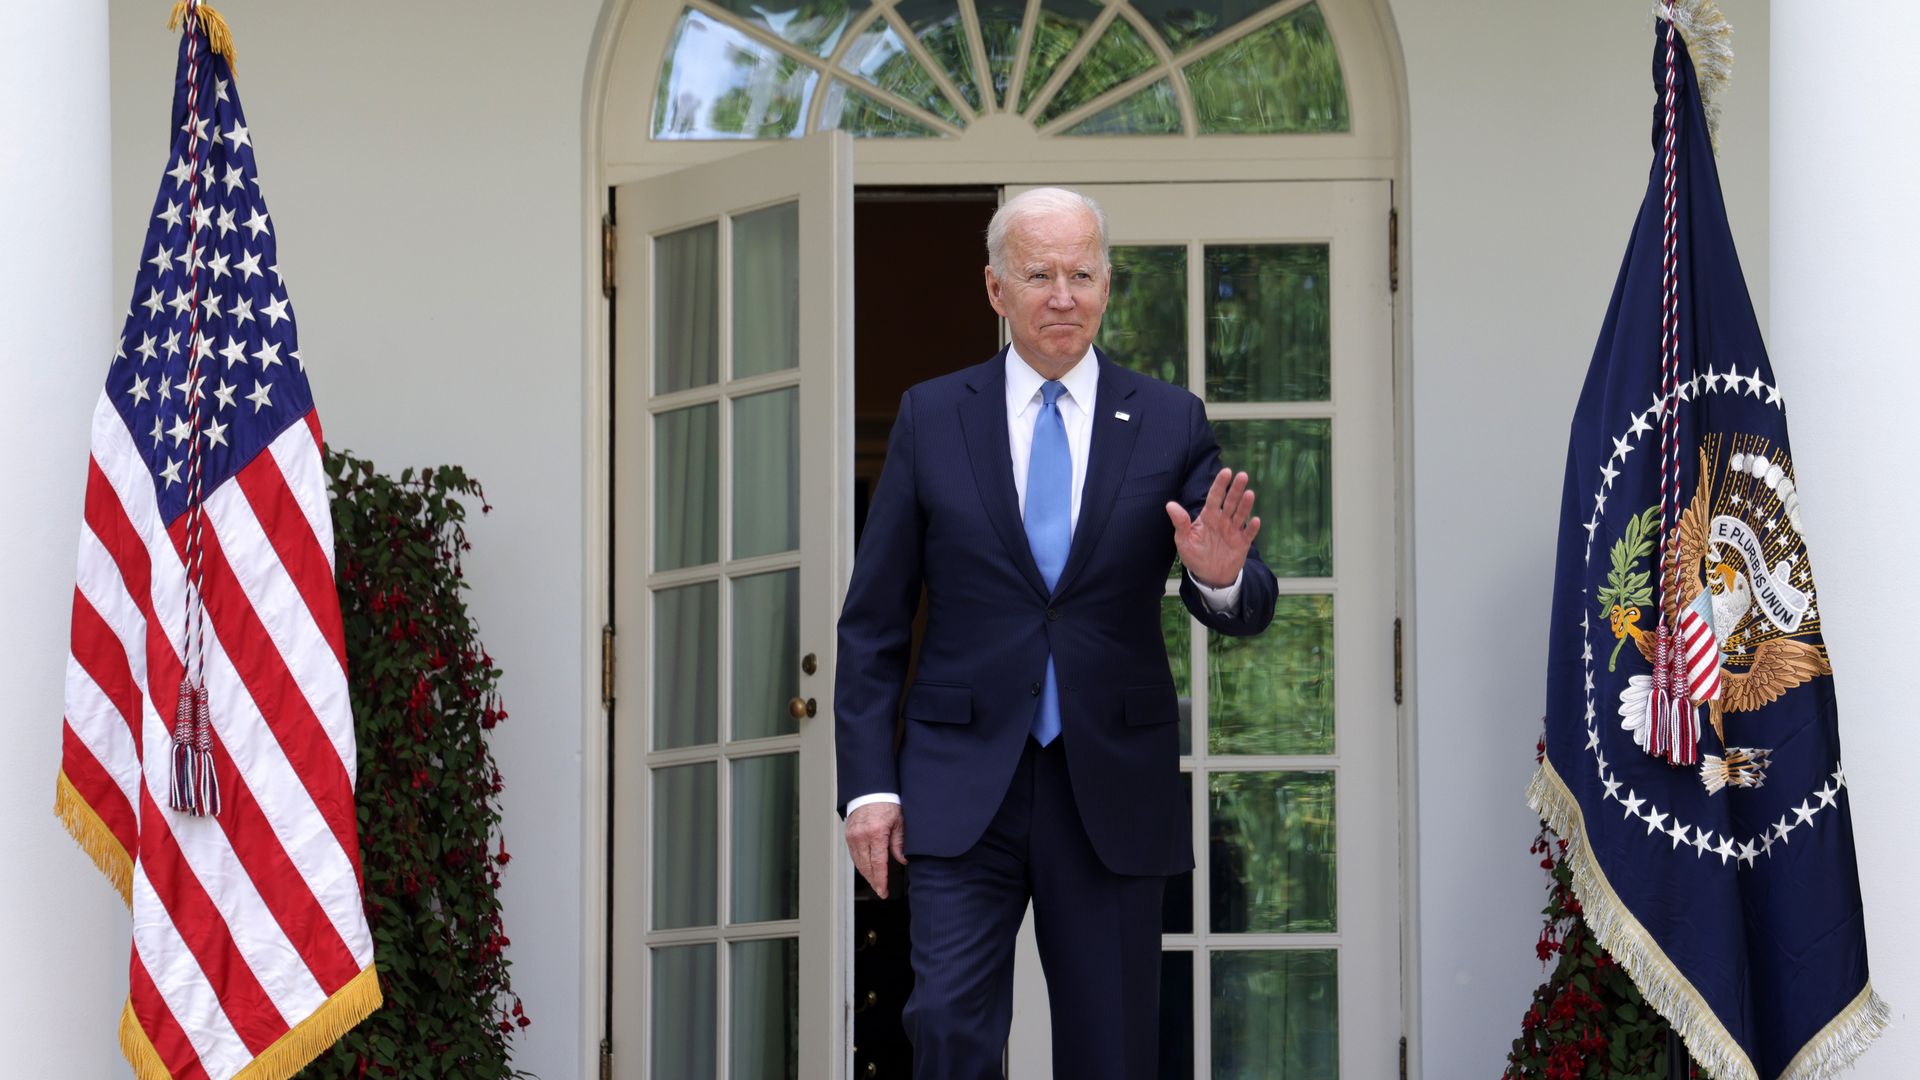 BIden stands between two flags at the White House and waves